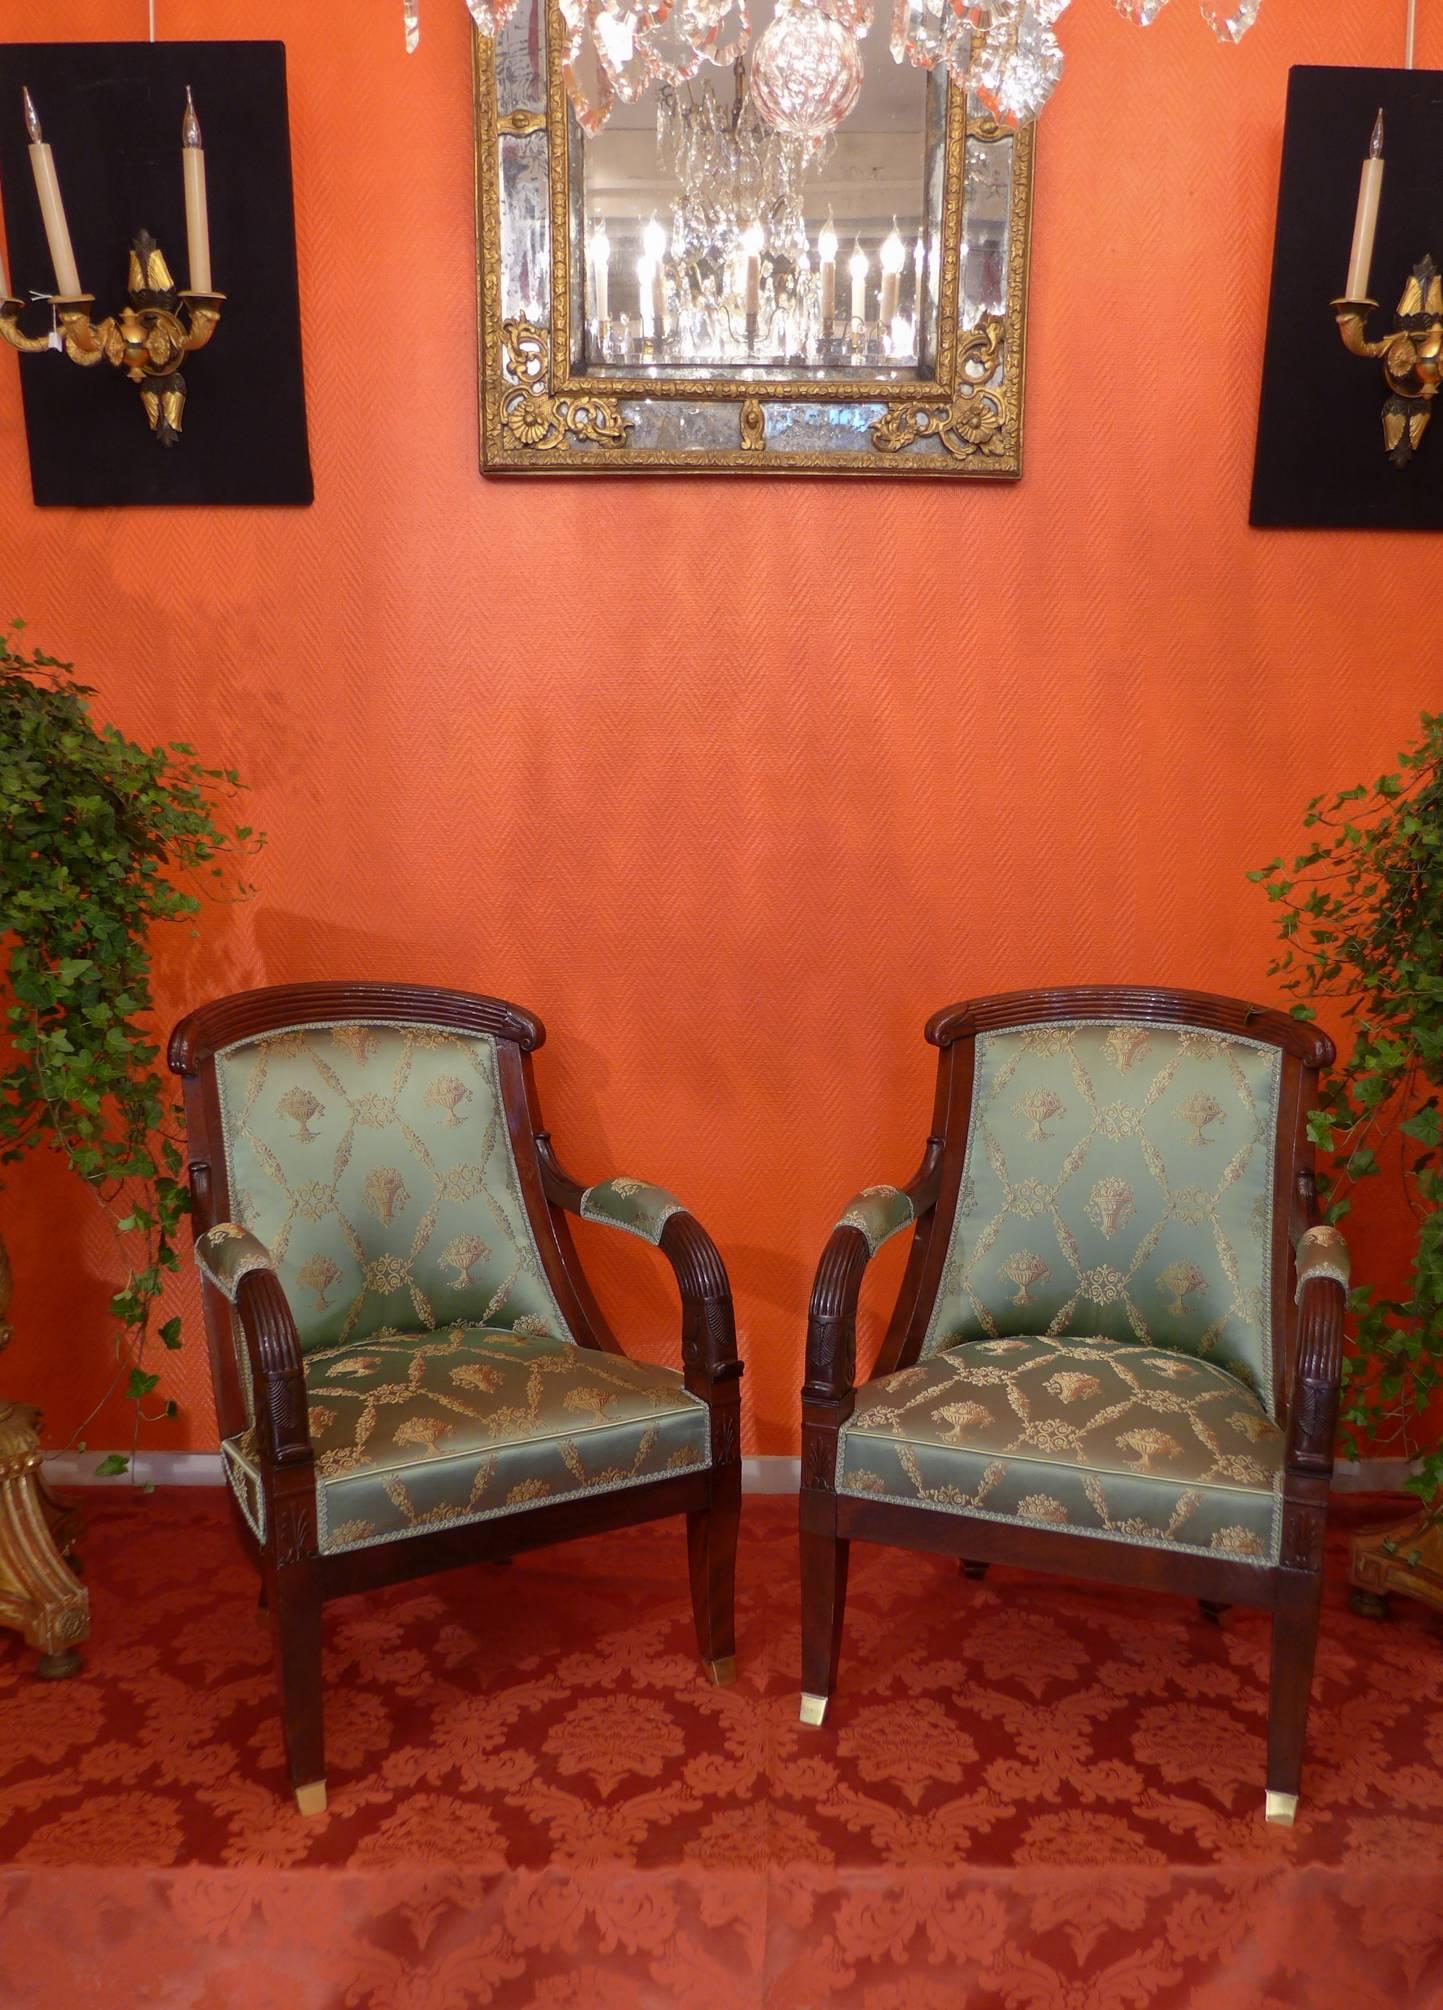 Gorgeous large pair of Empire period hand-carved solid mahogany and veneer mahogany armchairs. 

This extraordinary large Empire period armchairs has been recently reupholstered in a fabulous green celadon fabric by Tassinari that works magically